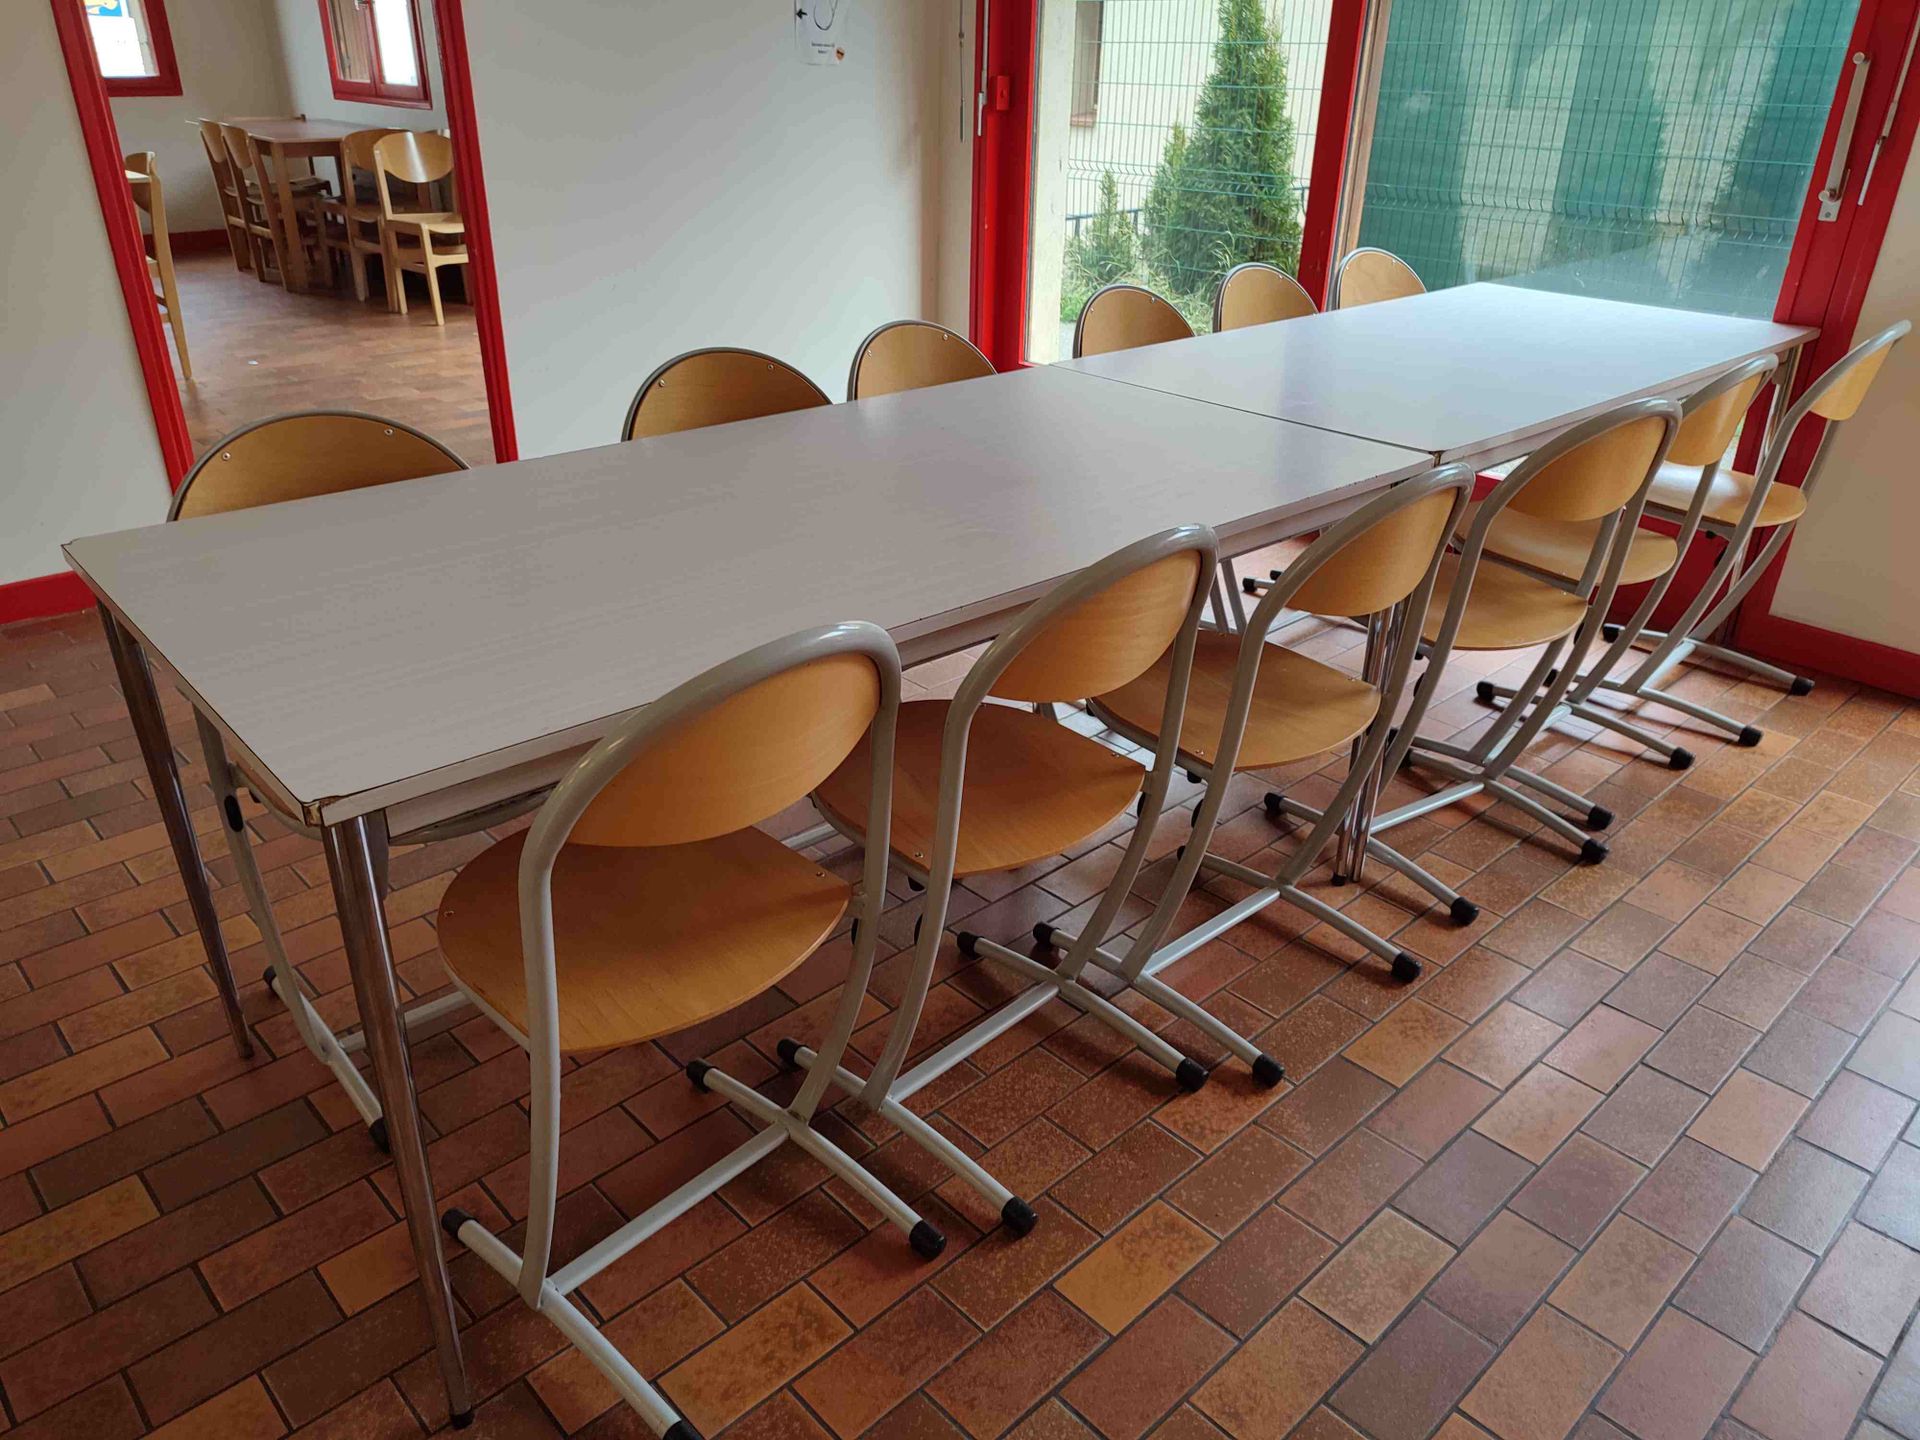 Null Set of catering furniture in used condition including:
- 2 tables of 6 seat&hellip;